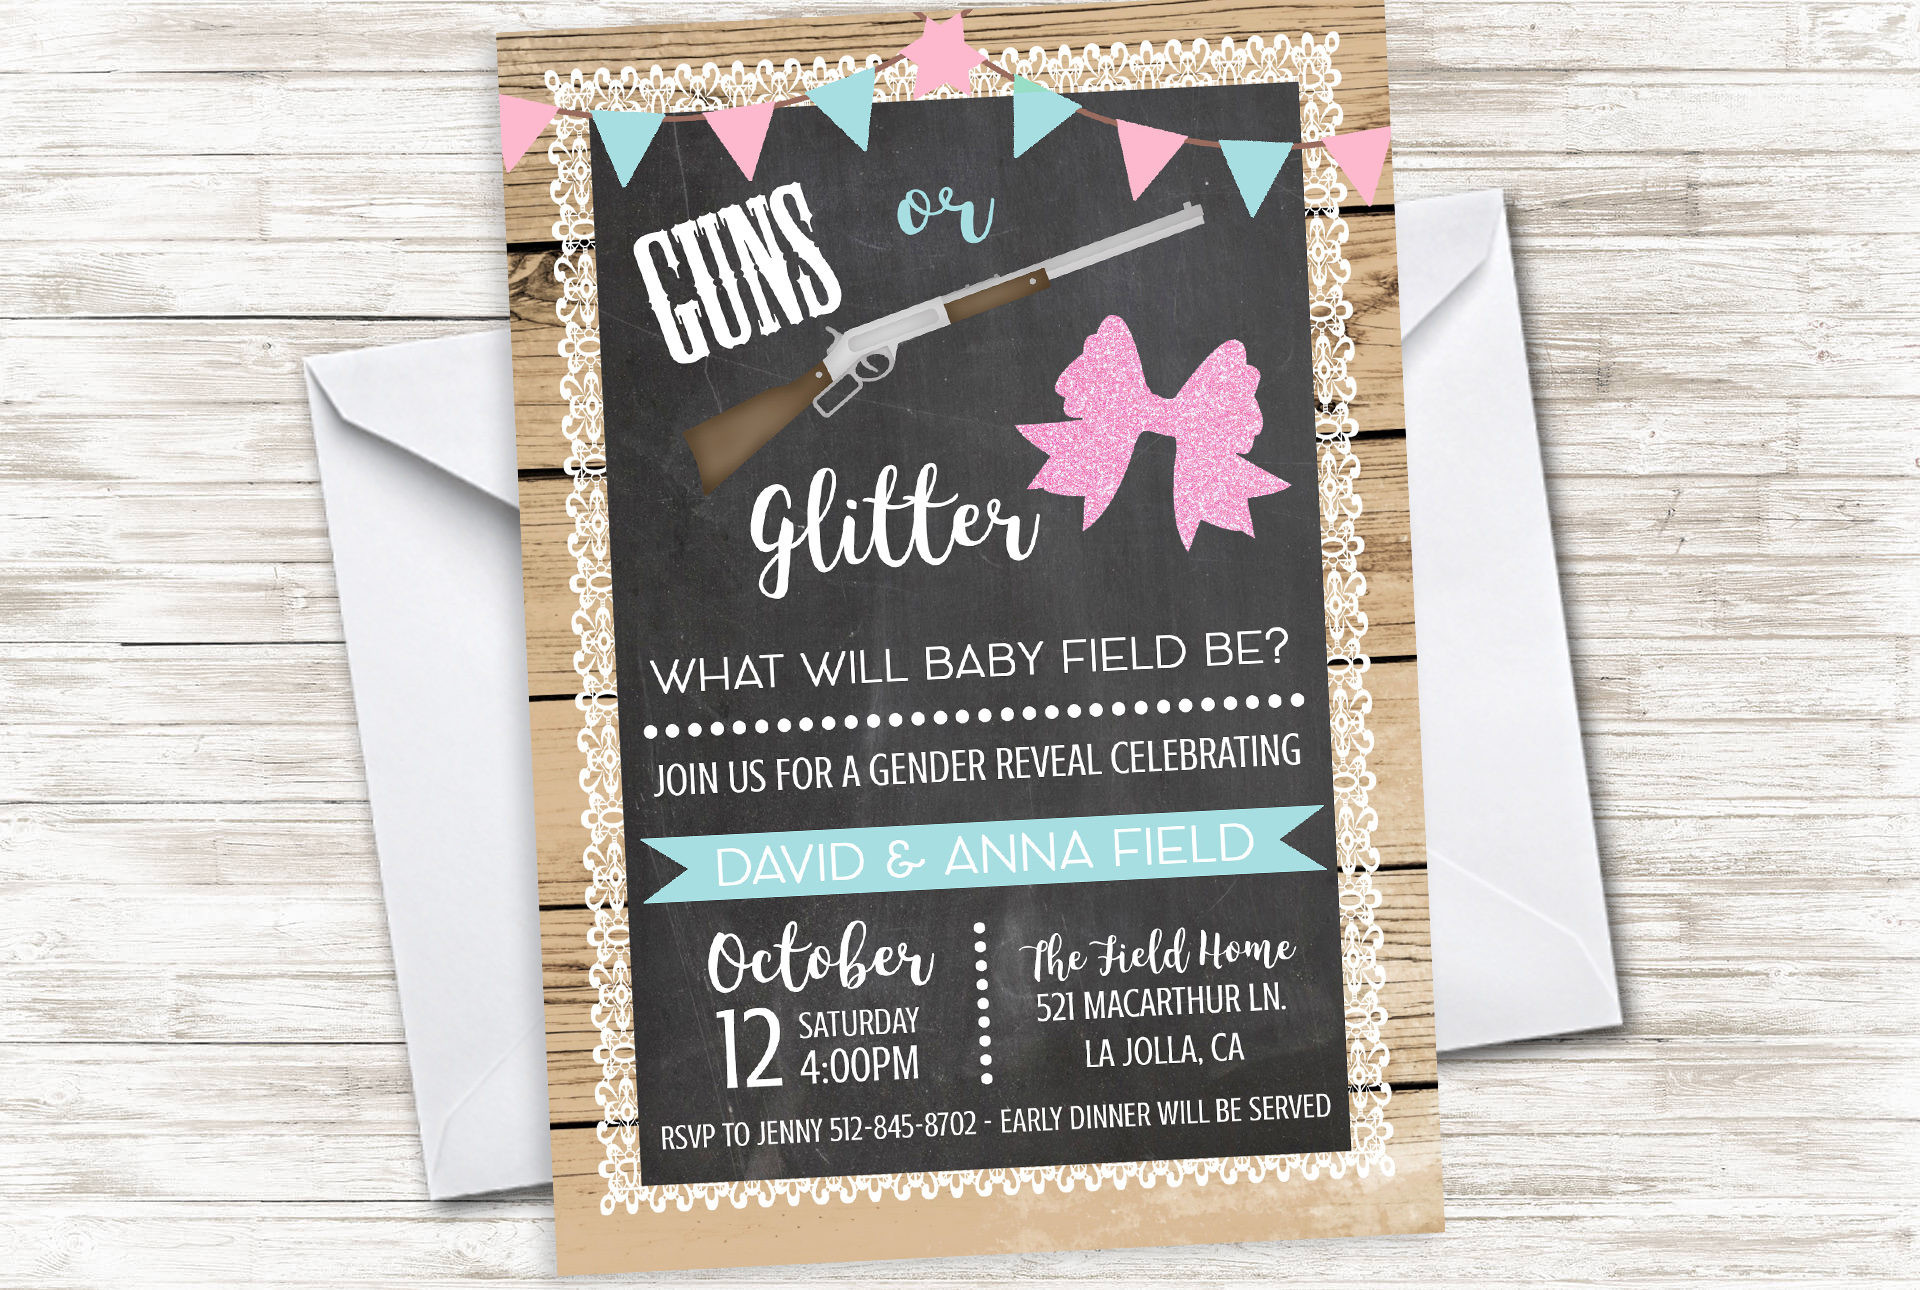 Guns And Glitter Gender Reveal Party Ideas
 Guns or Glitter Gender Reveal Invite Invitation Digital